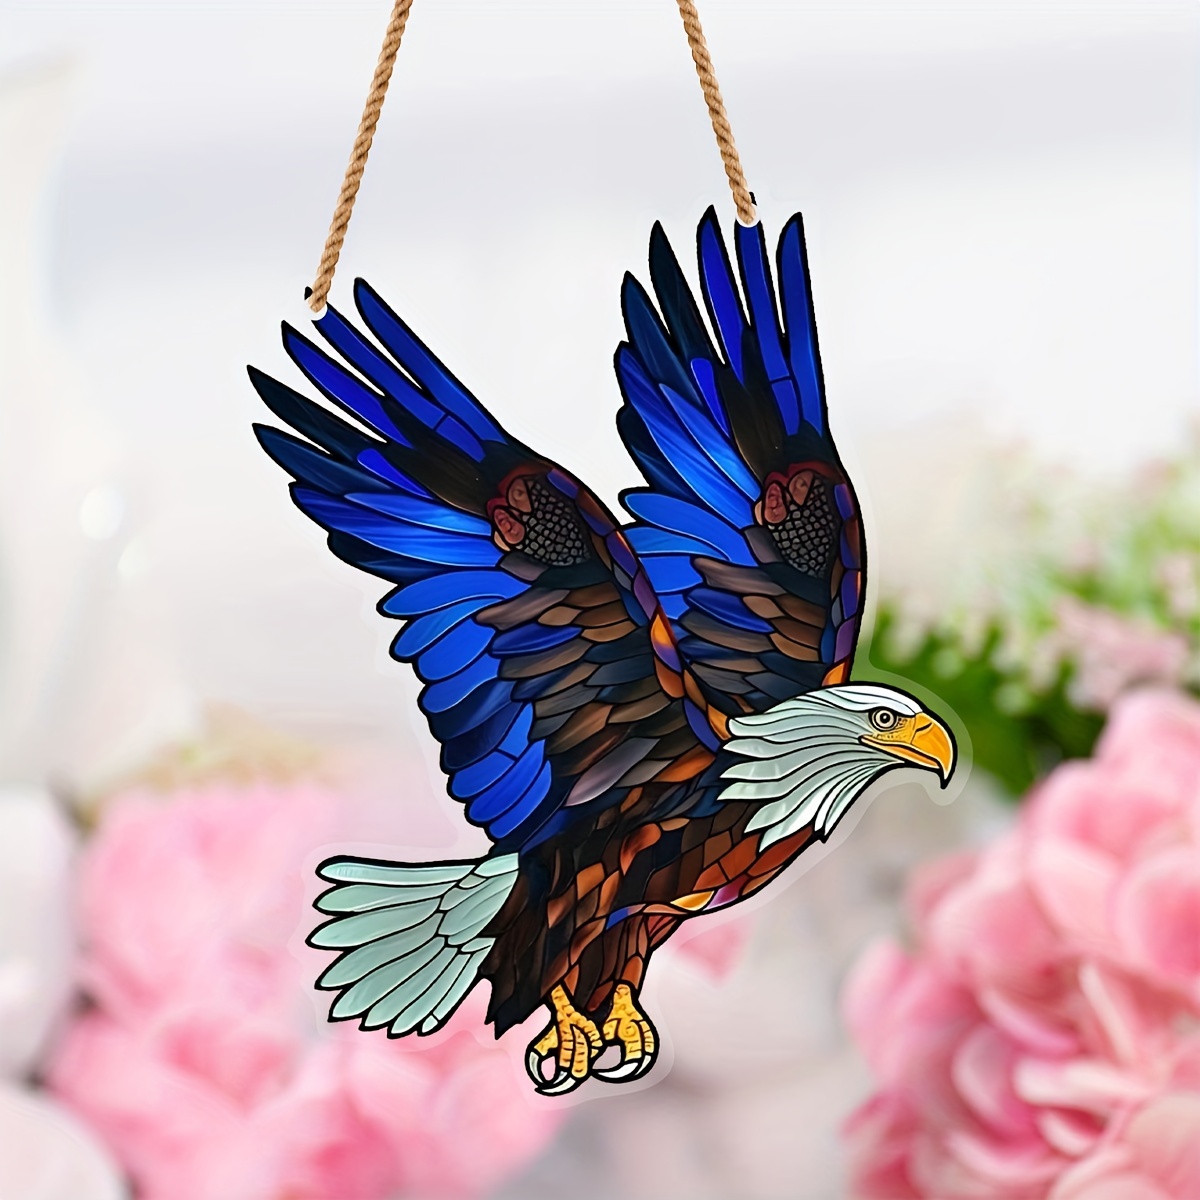 

Eagle Suncatcher Window Hanging - Acrylic, No Power Needed, Perfect For Indoor & Outdoor Decor, Ideal Gift For Bird Enthusiasts